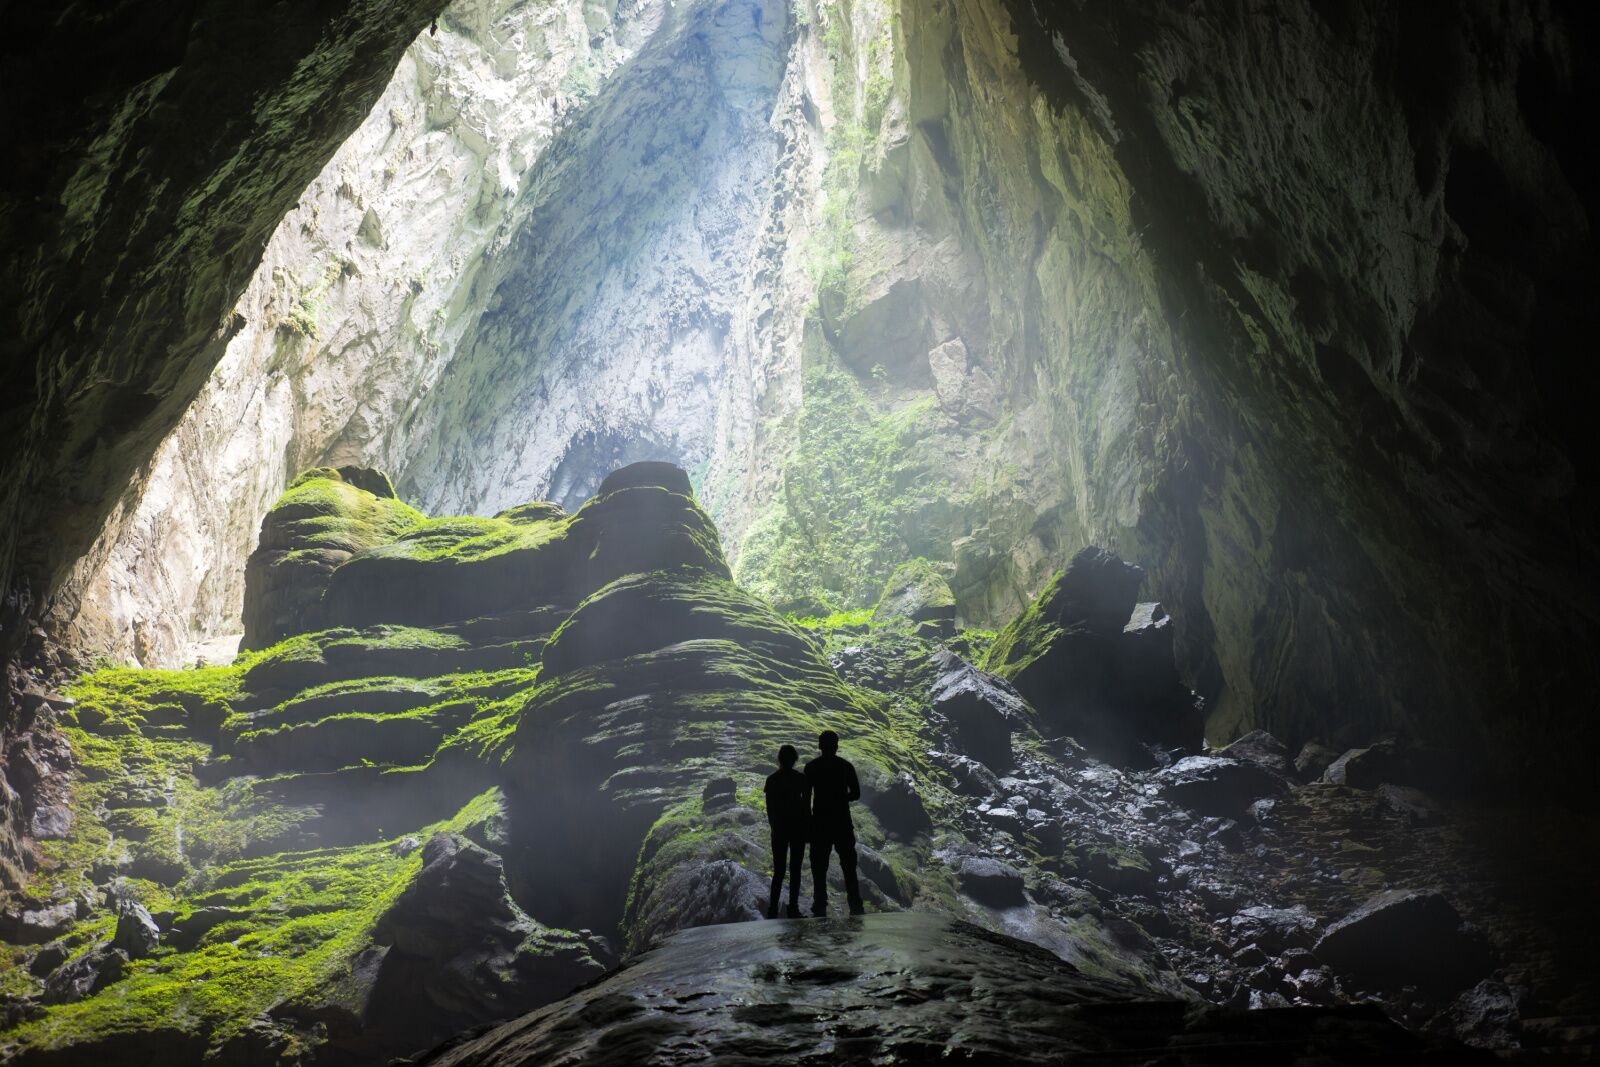 Phong Nha cave system - biggest cave in world 